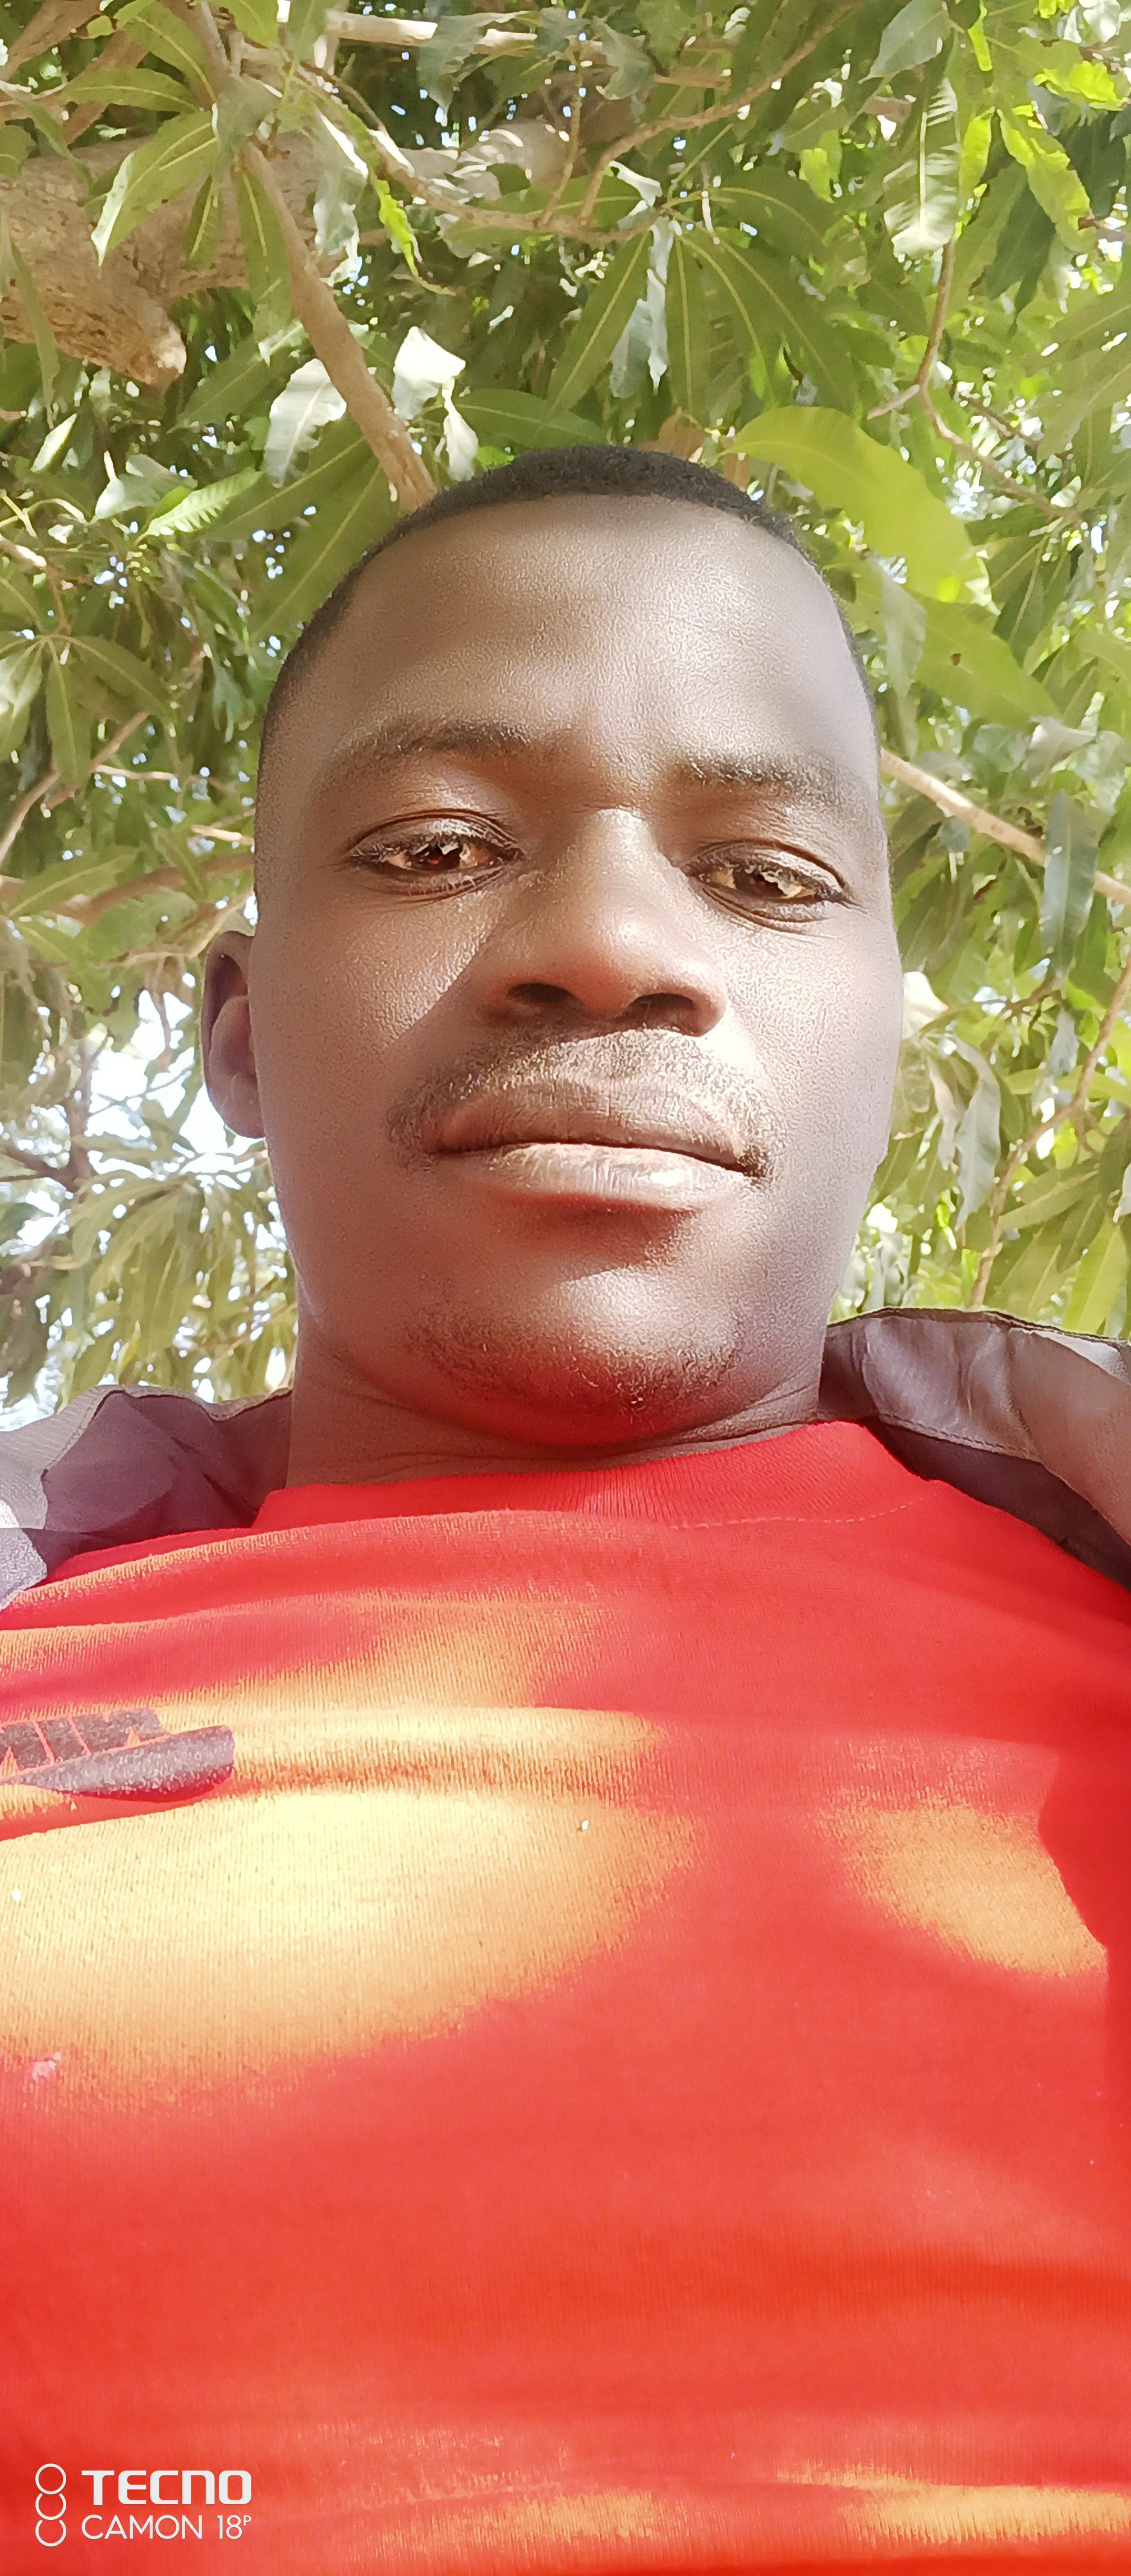 Ibrahimakabore039 Profile Picture